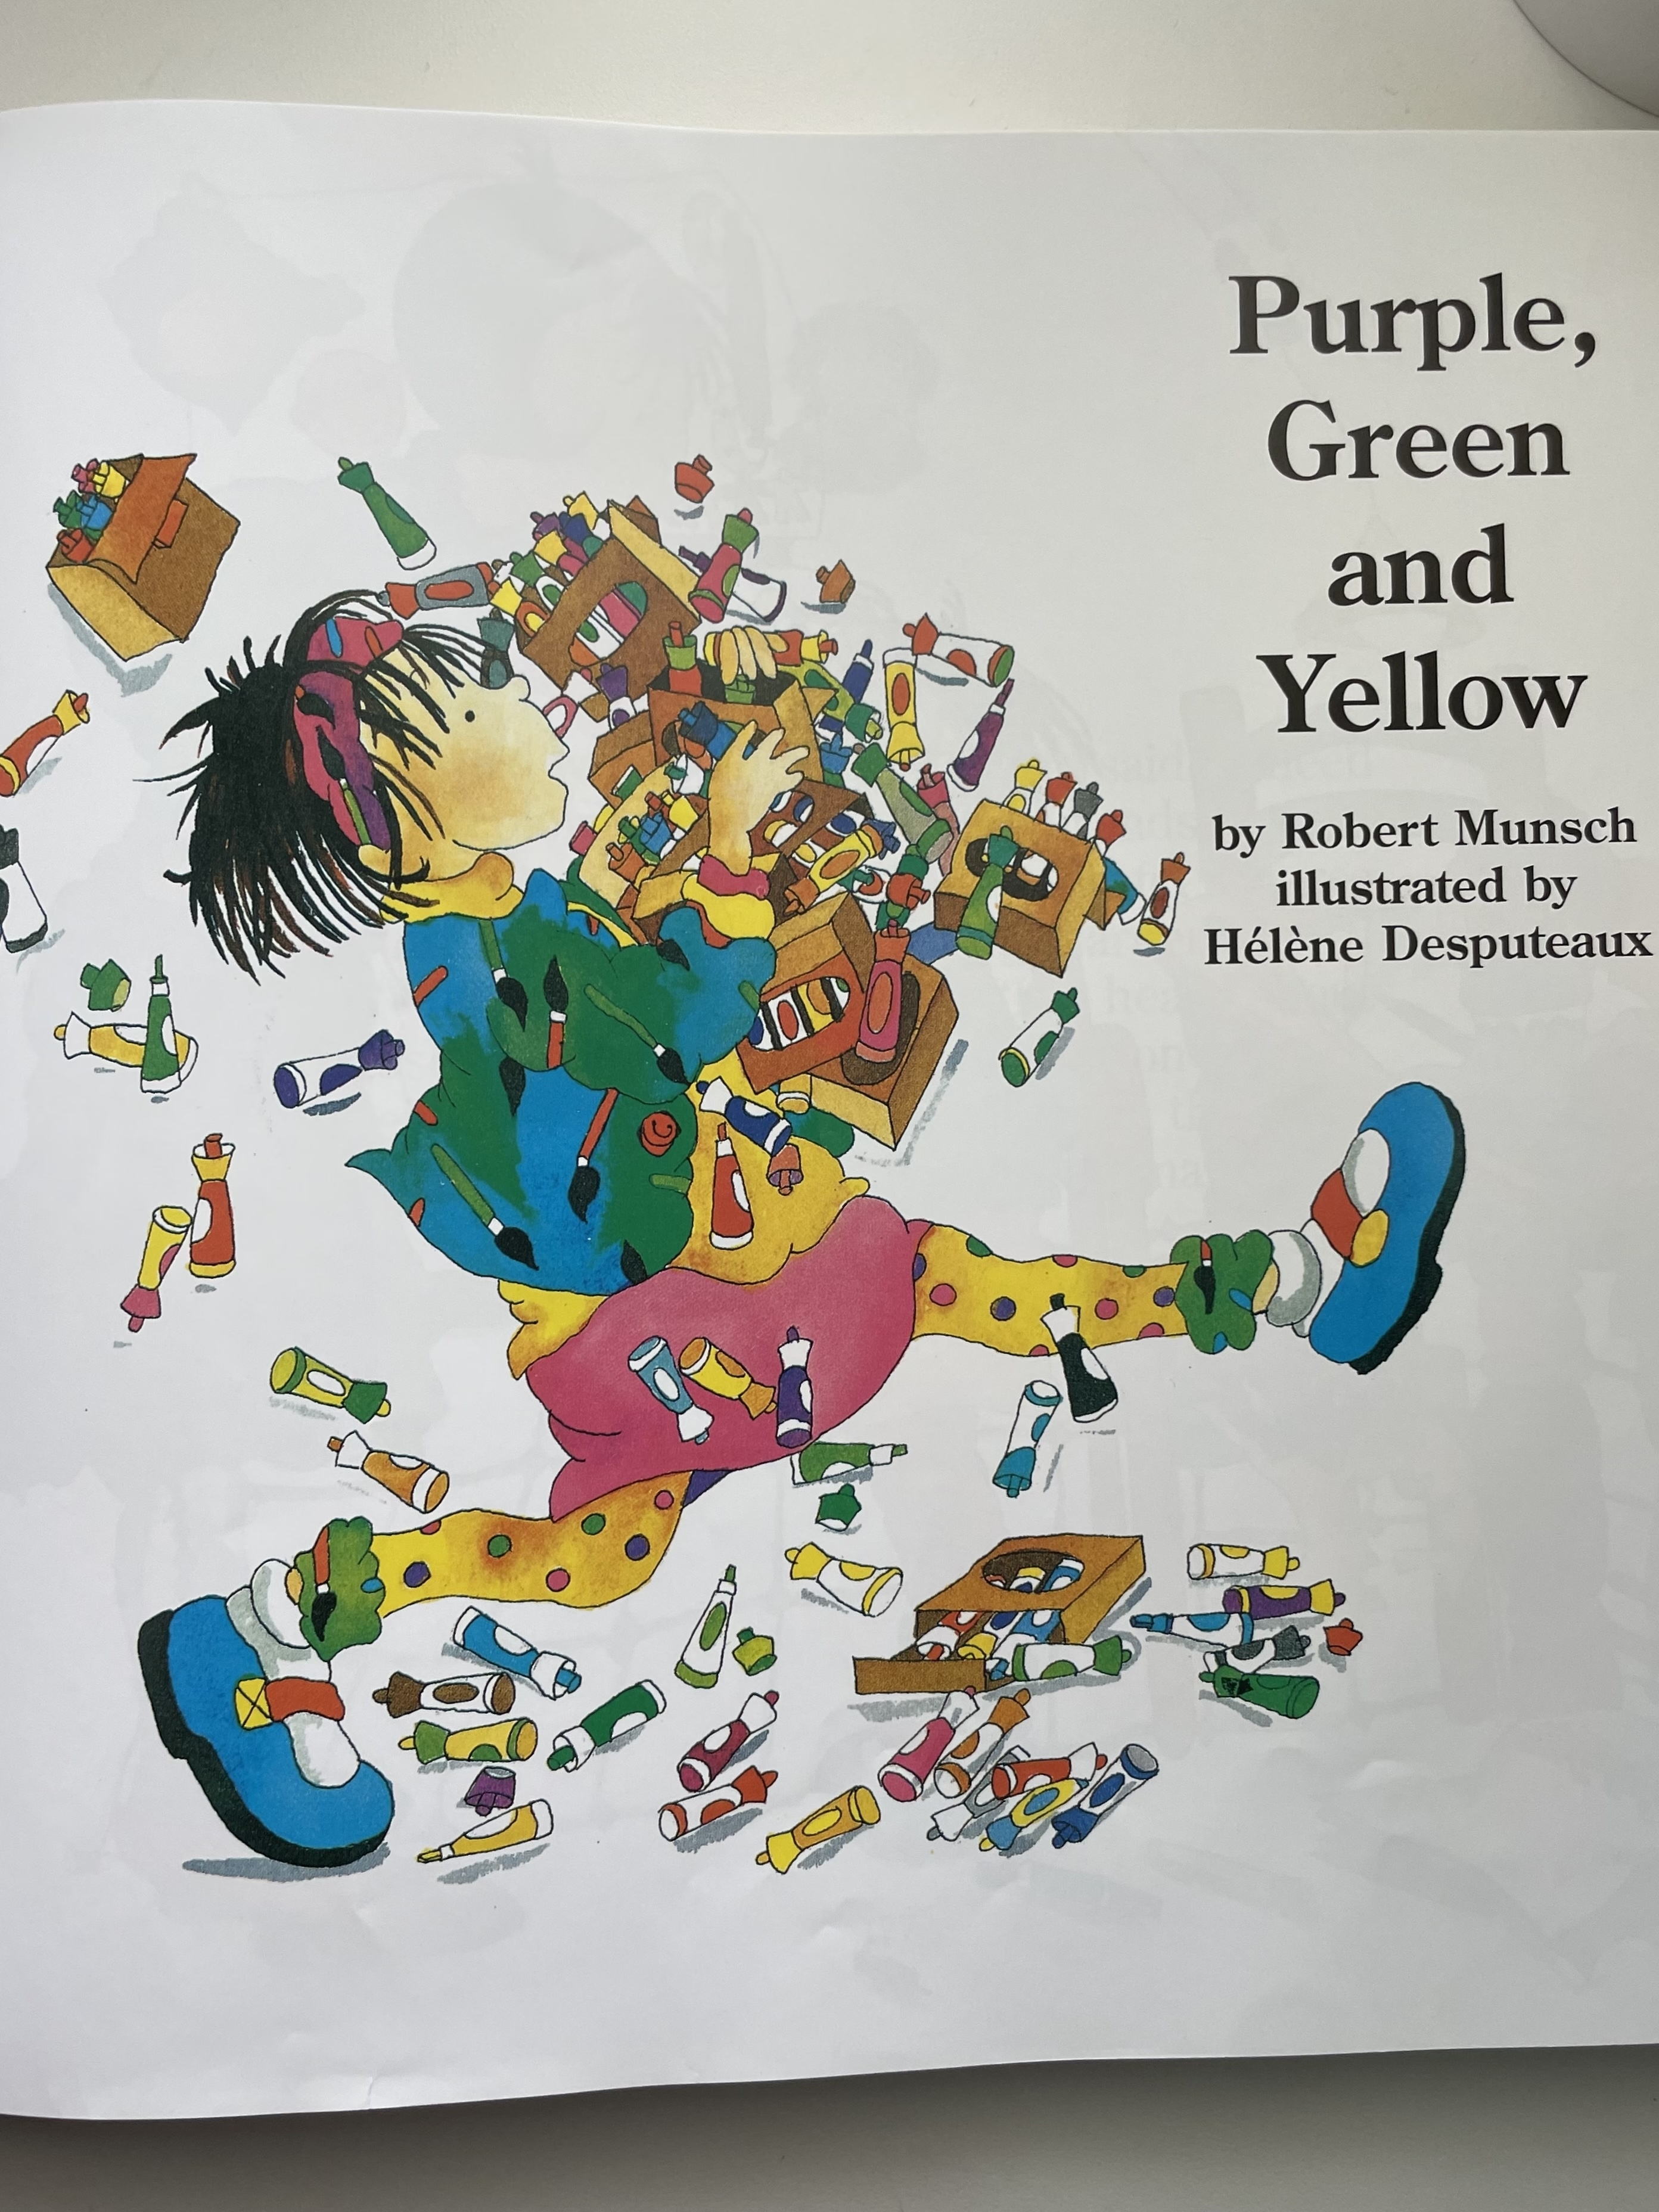 Cover of &quot;Purple, Green, and Yellow&quot; by Robert Munsch, illustrated by Hélène Desputeaux, showing a child surrounded by markers